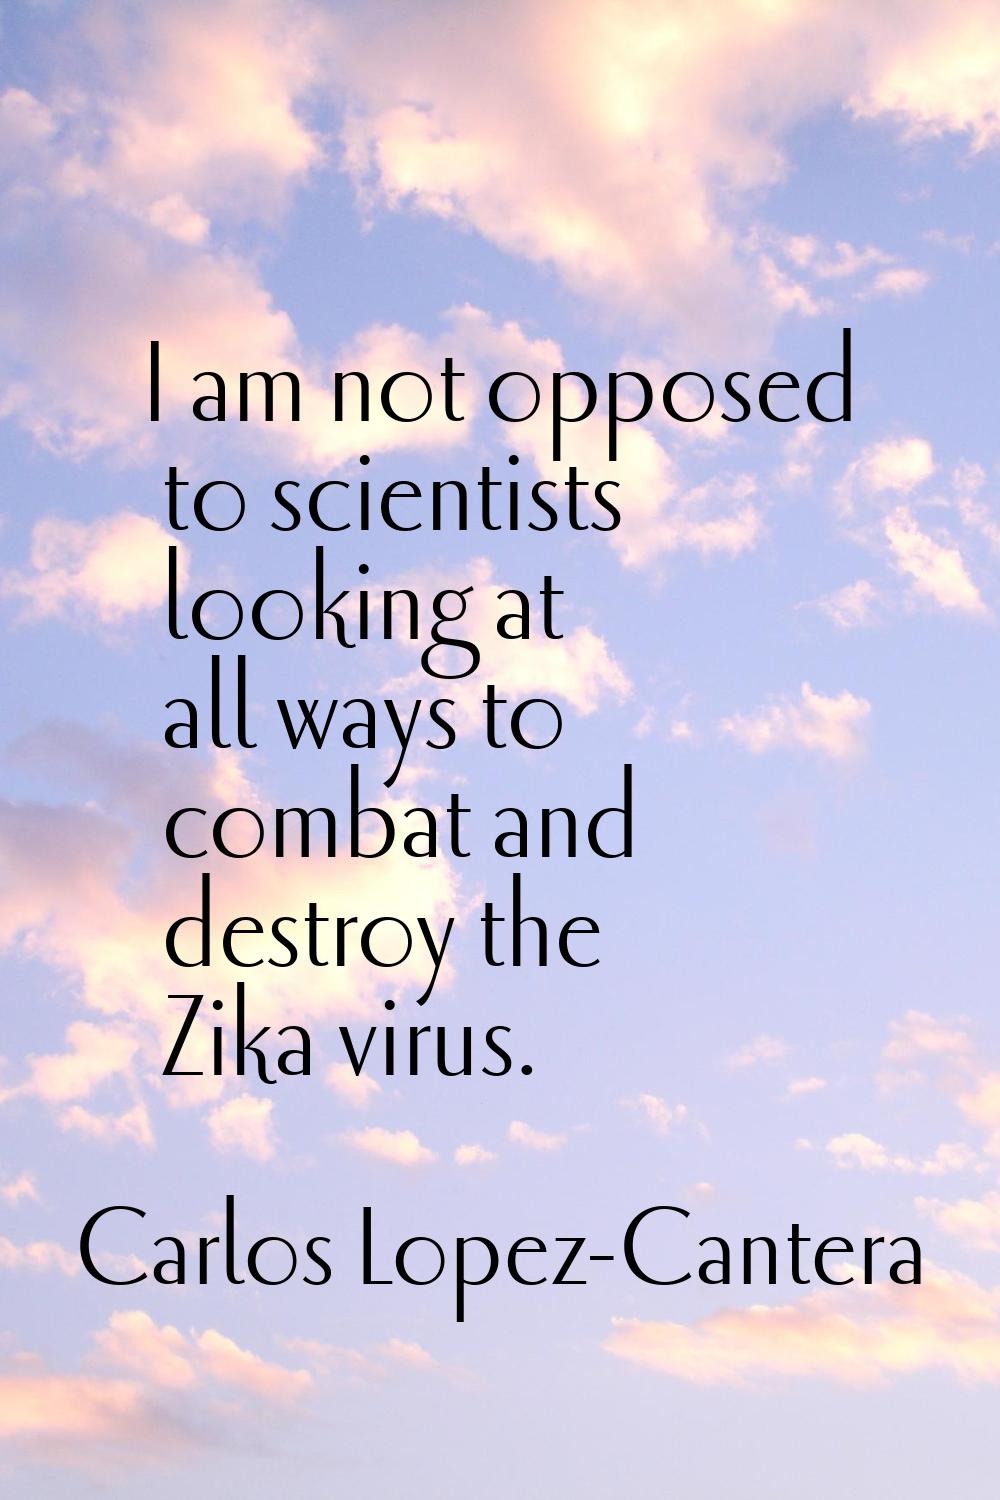 I am not opposed to scientists looking at all ways to combat and destroy the Zika virus.